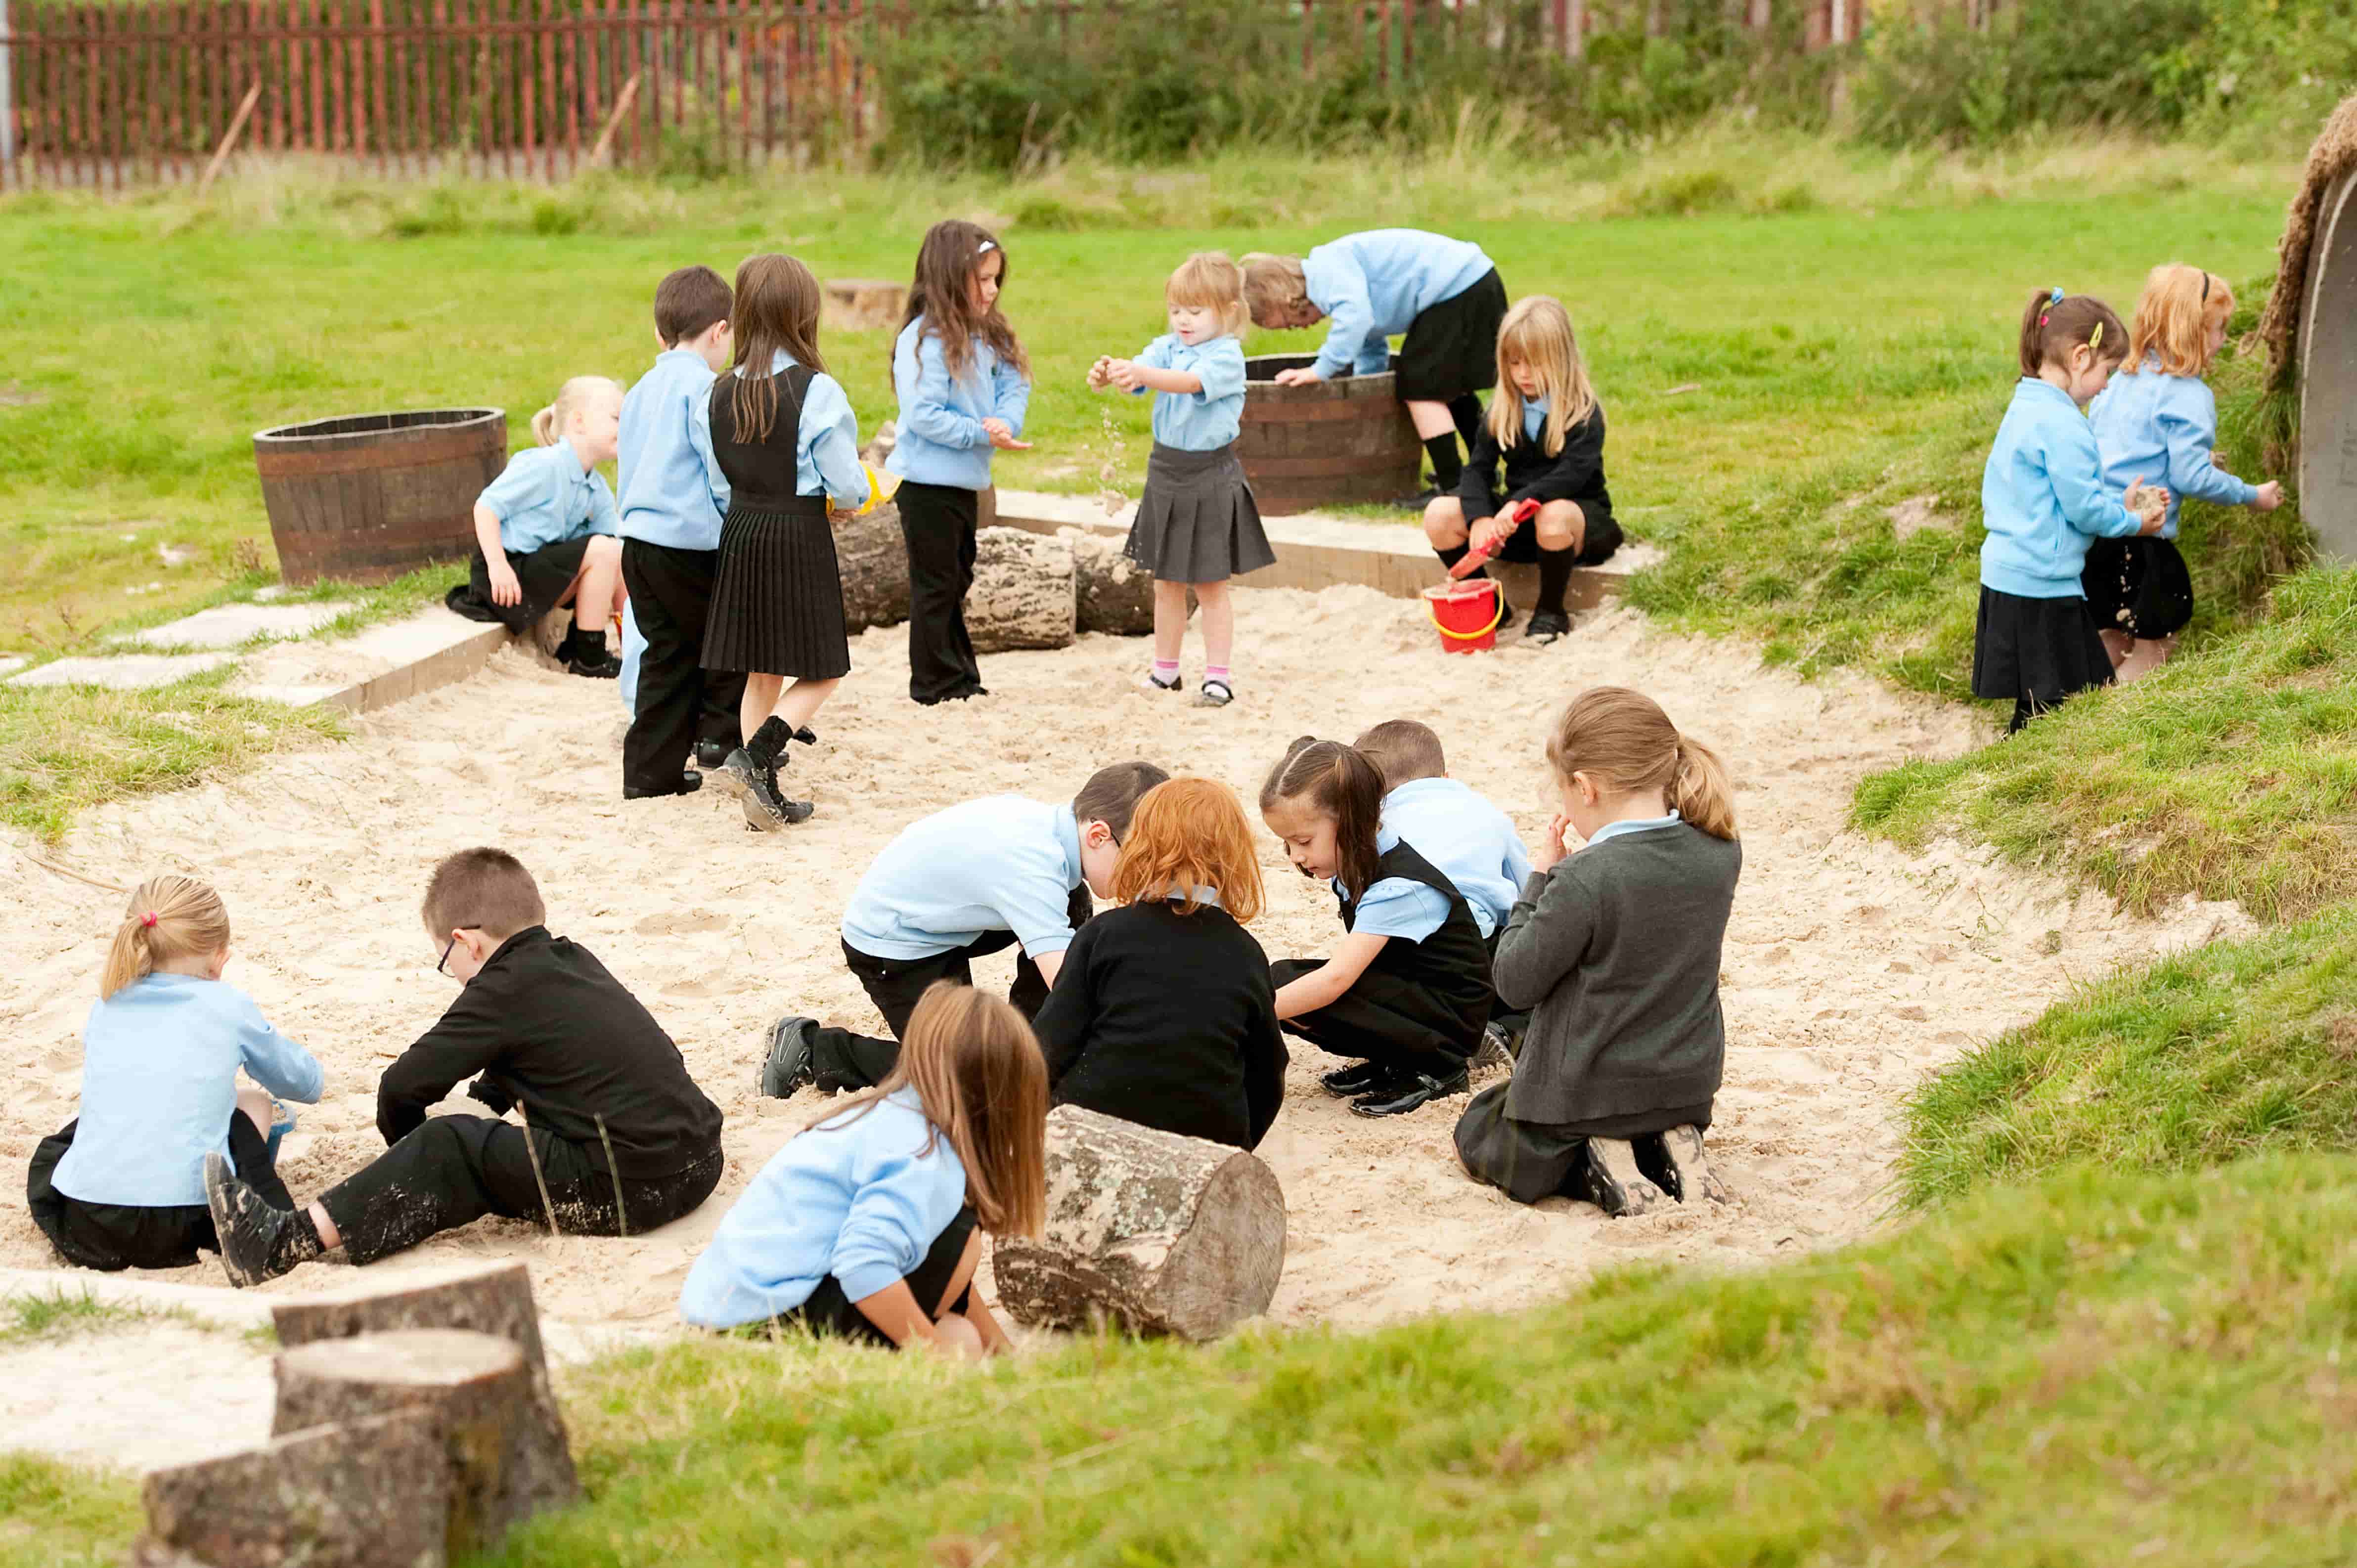 Children wearing school uniform playing in the sand surrounded by grass.